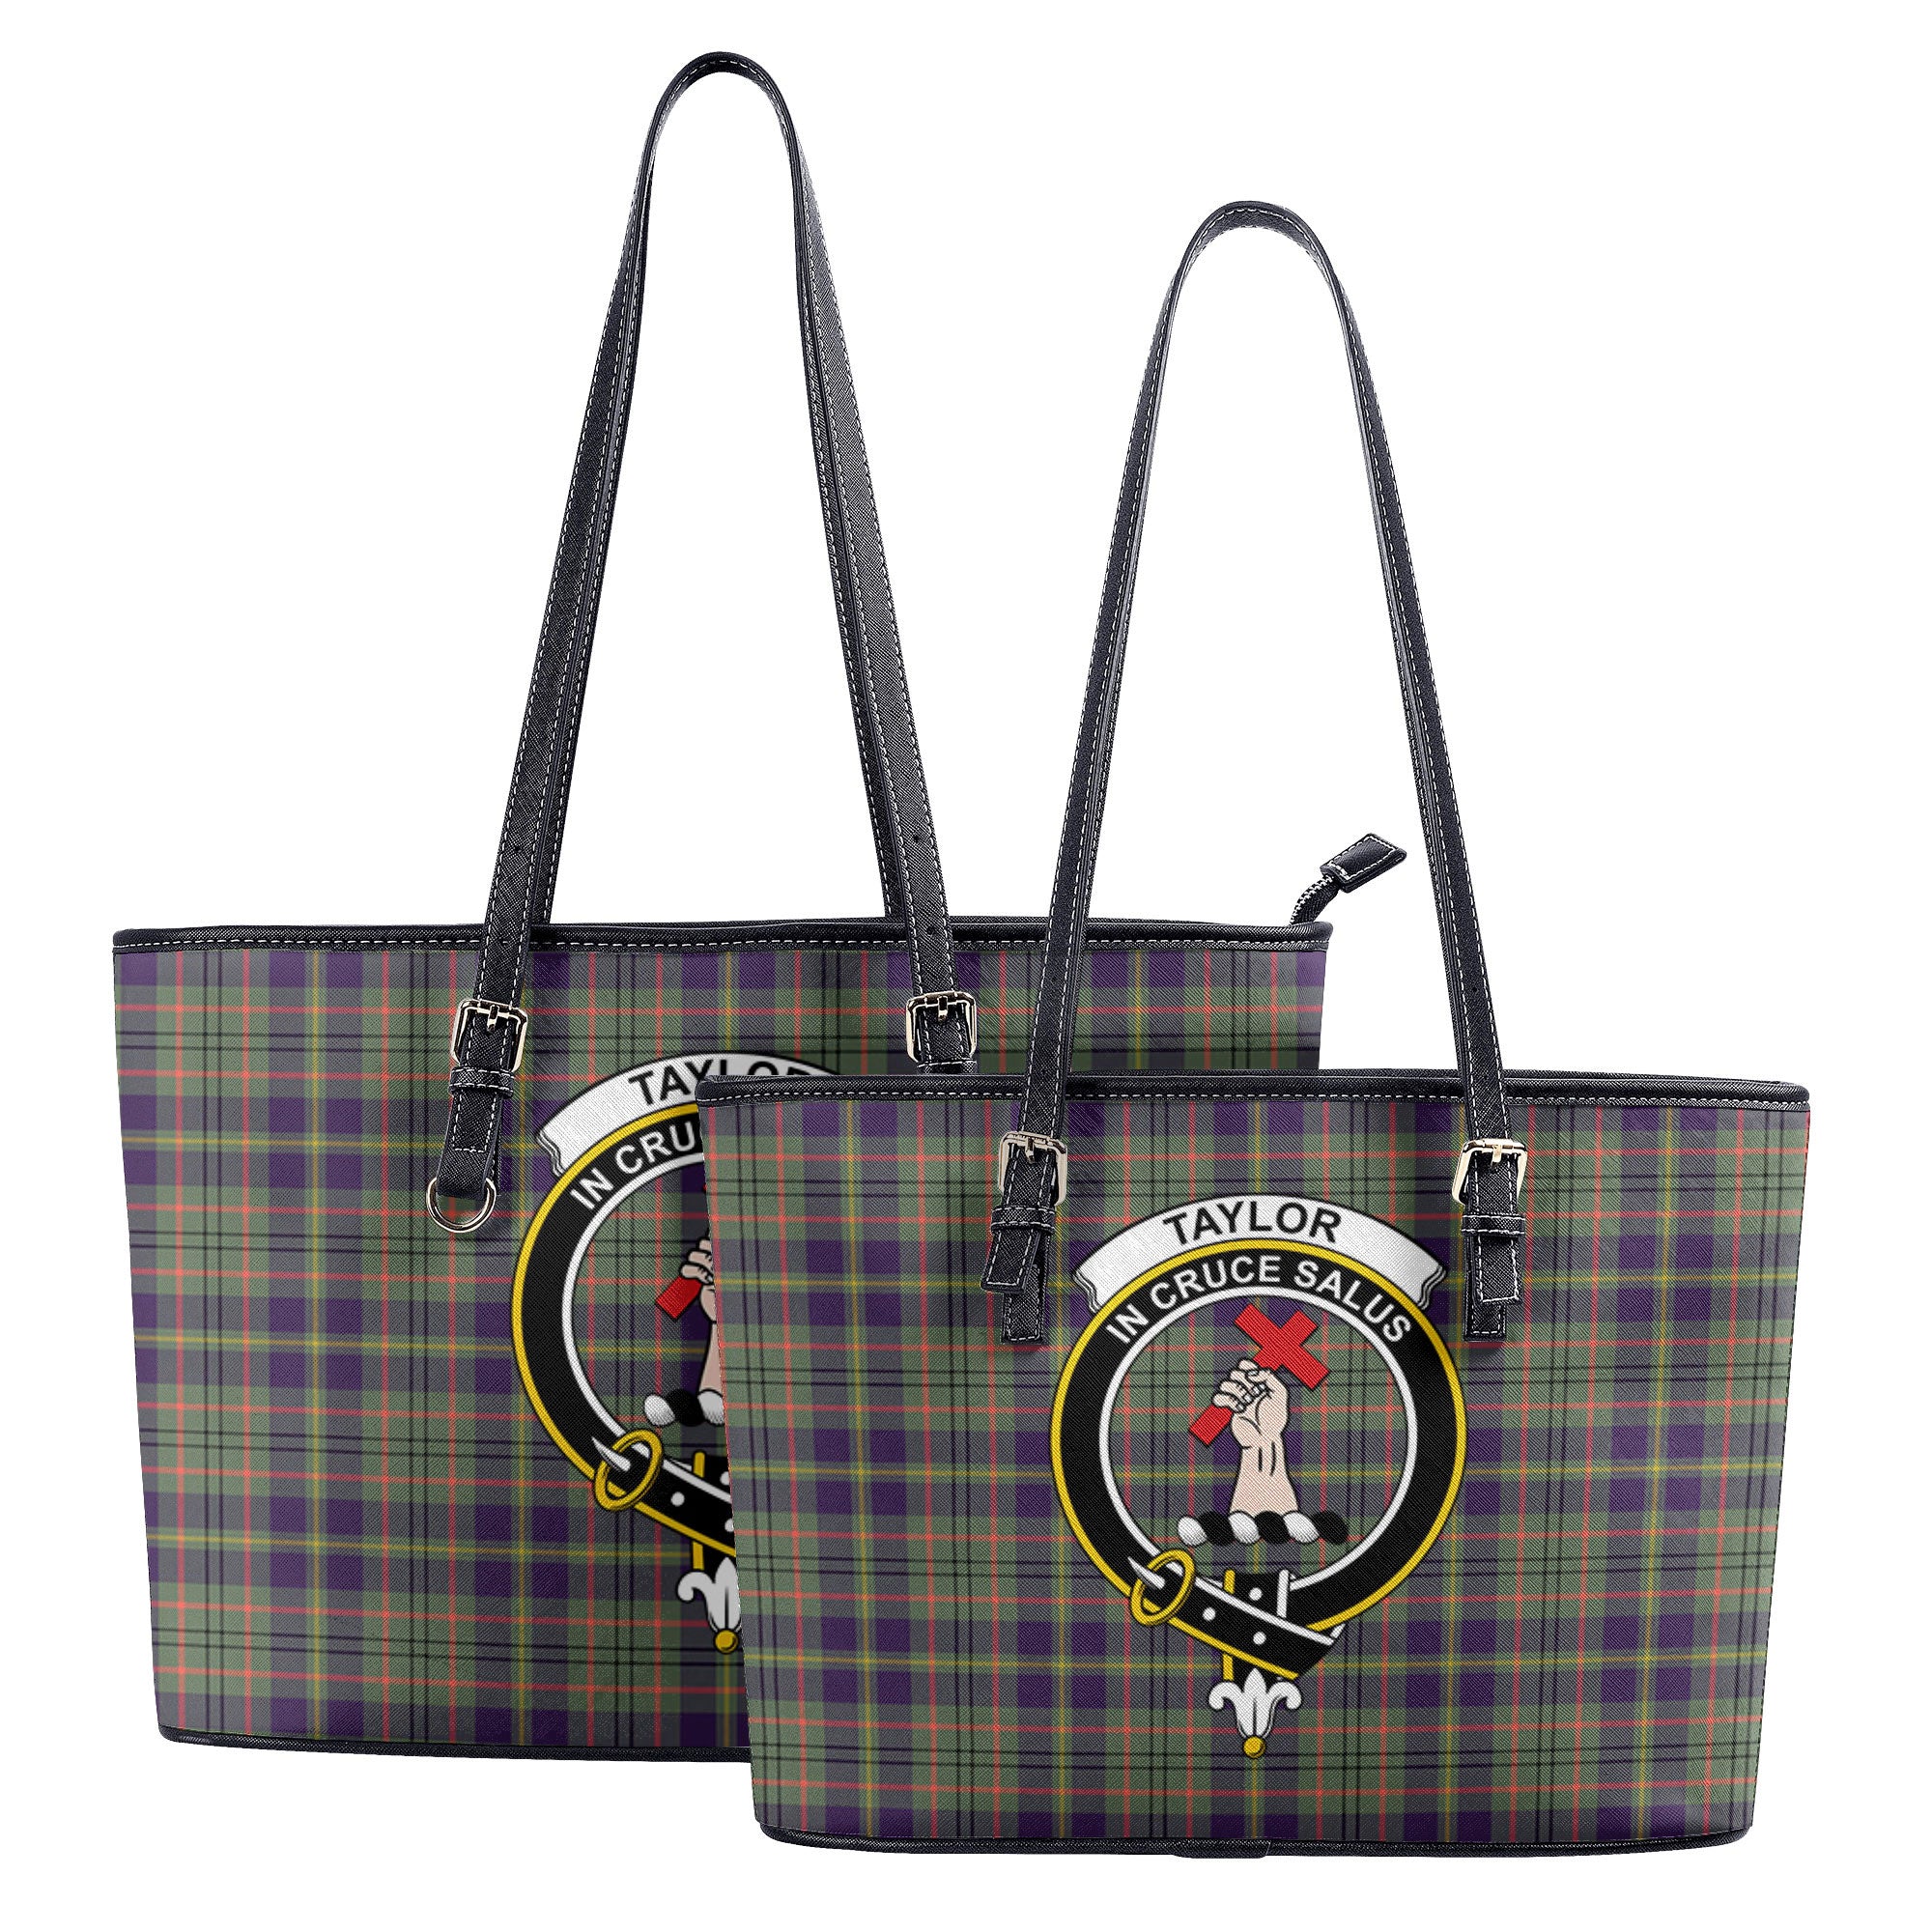 Taylor Weathered Tartan Crest Leather Tote Bag